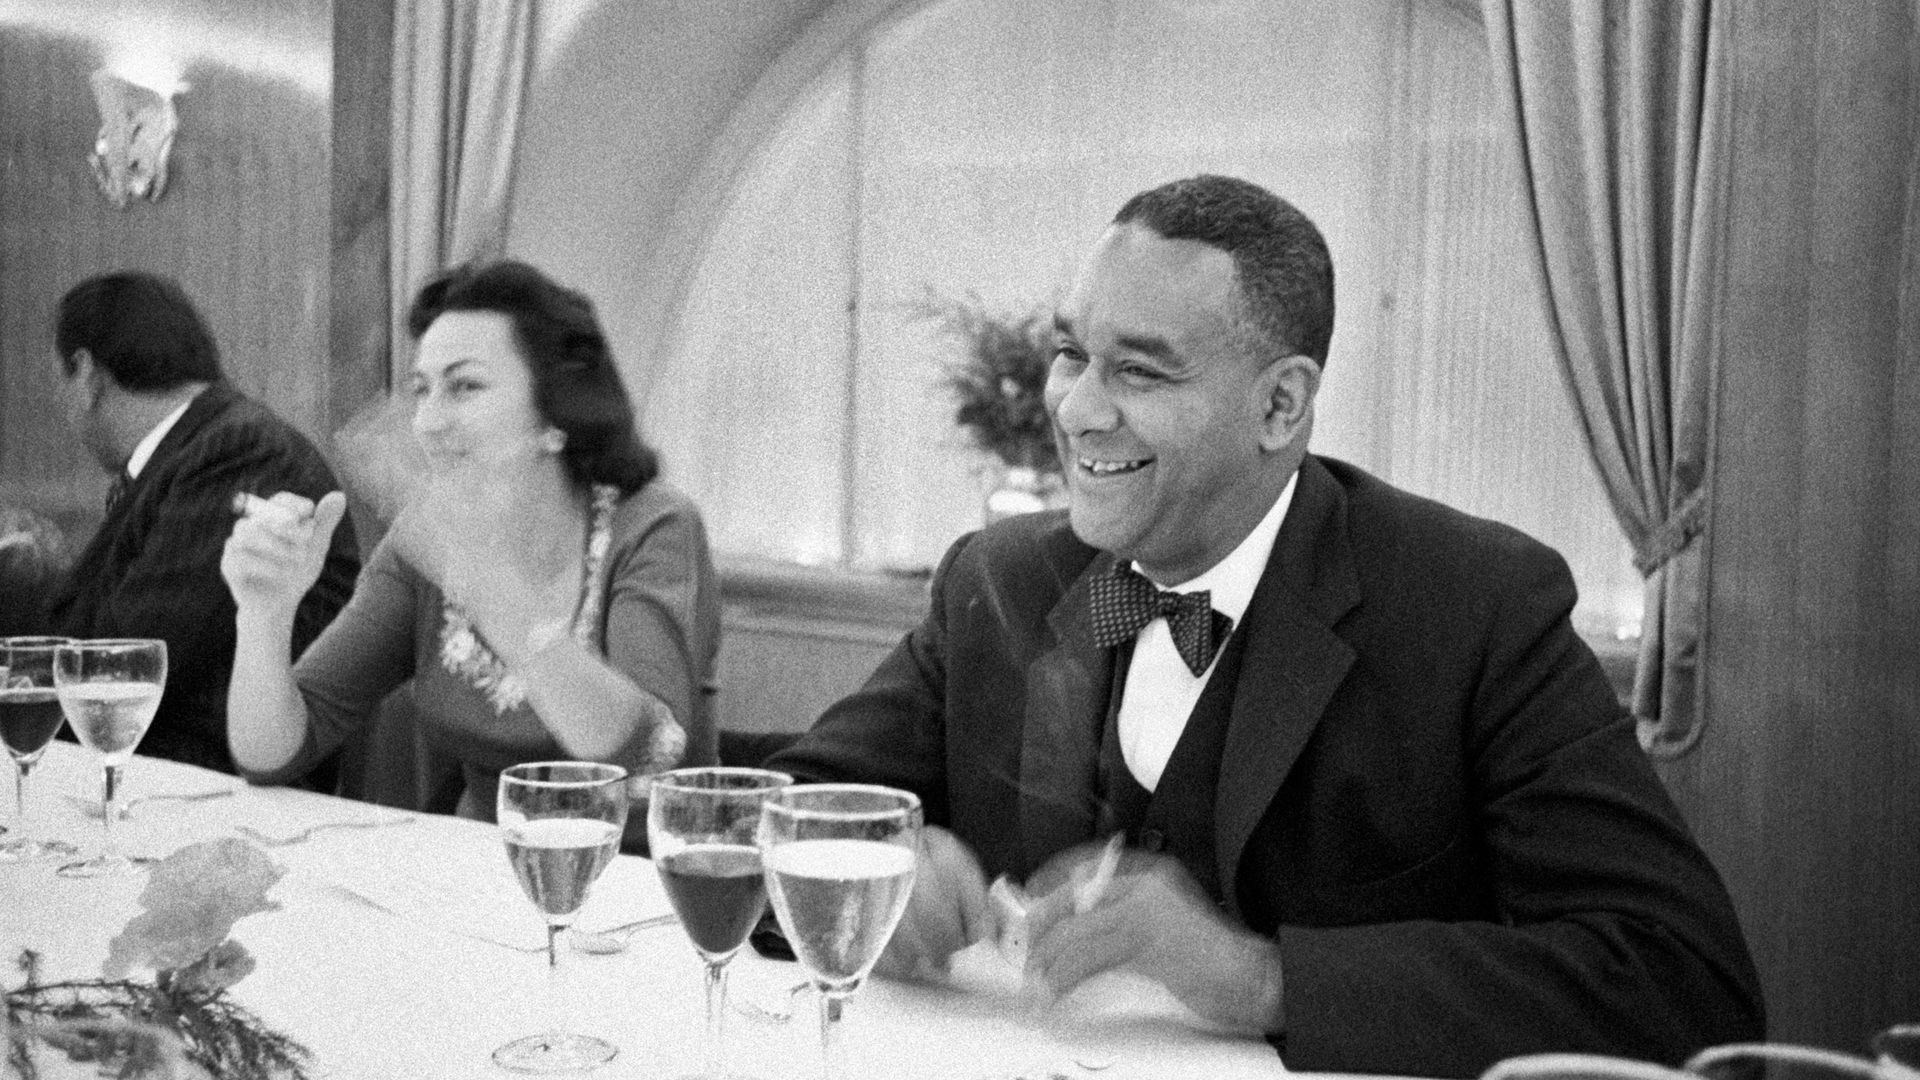 American writer Richard Wright sitting at the table and smiling during his visit to Italy for the publication of the book Black power. Milan, 1957. 